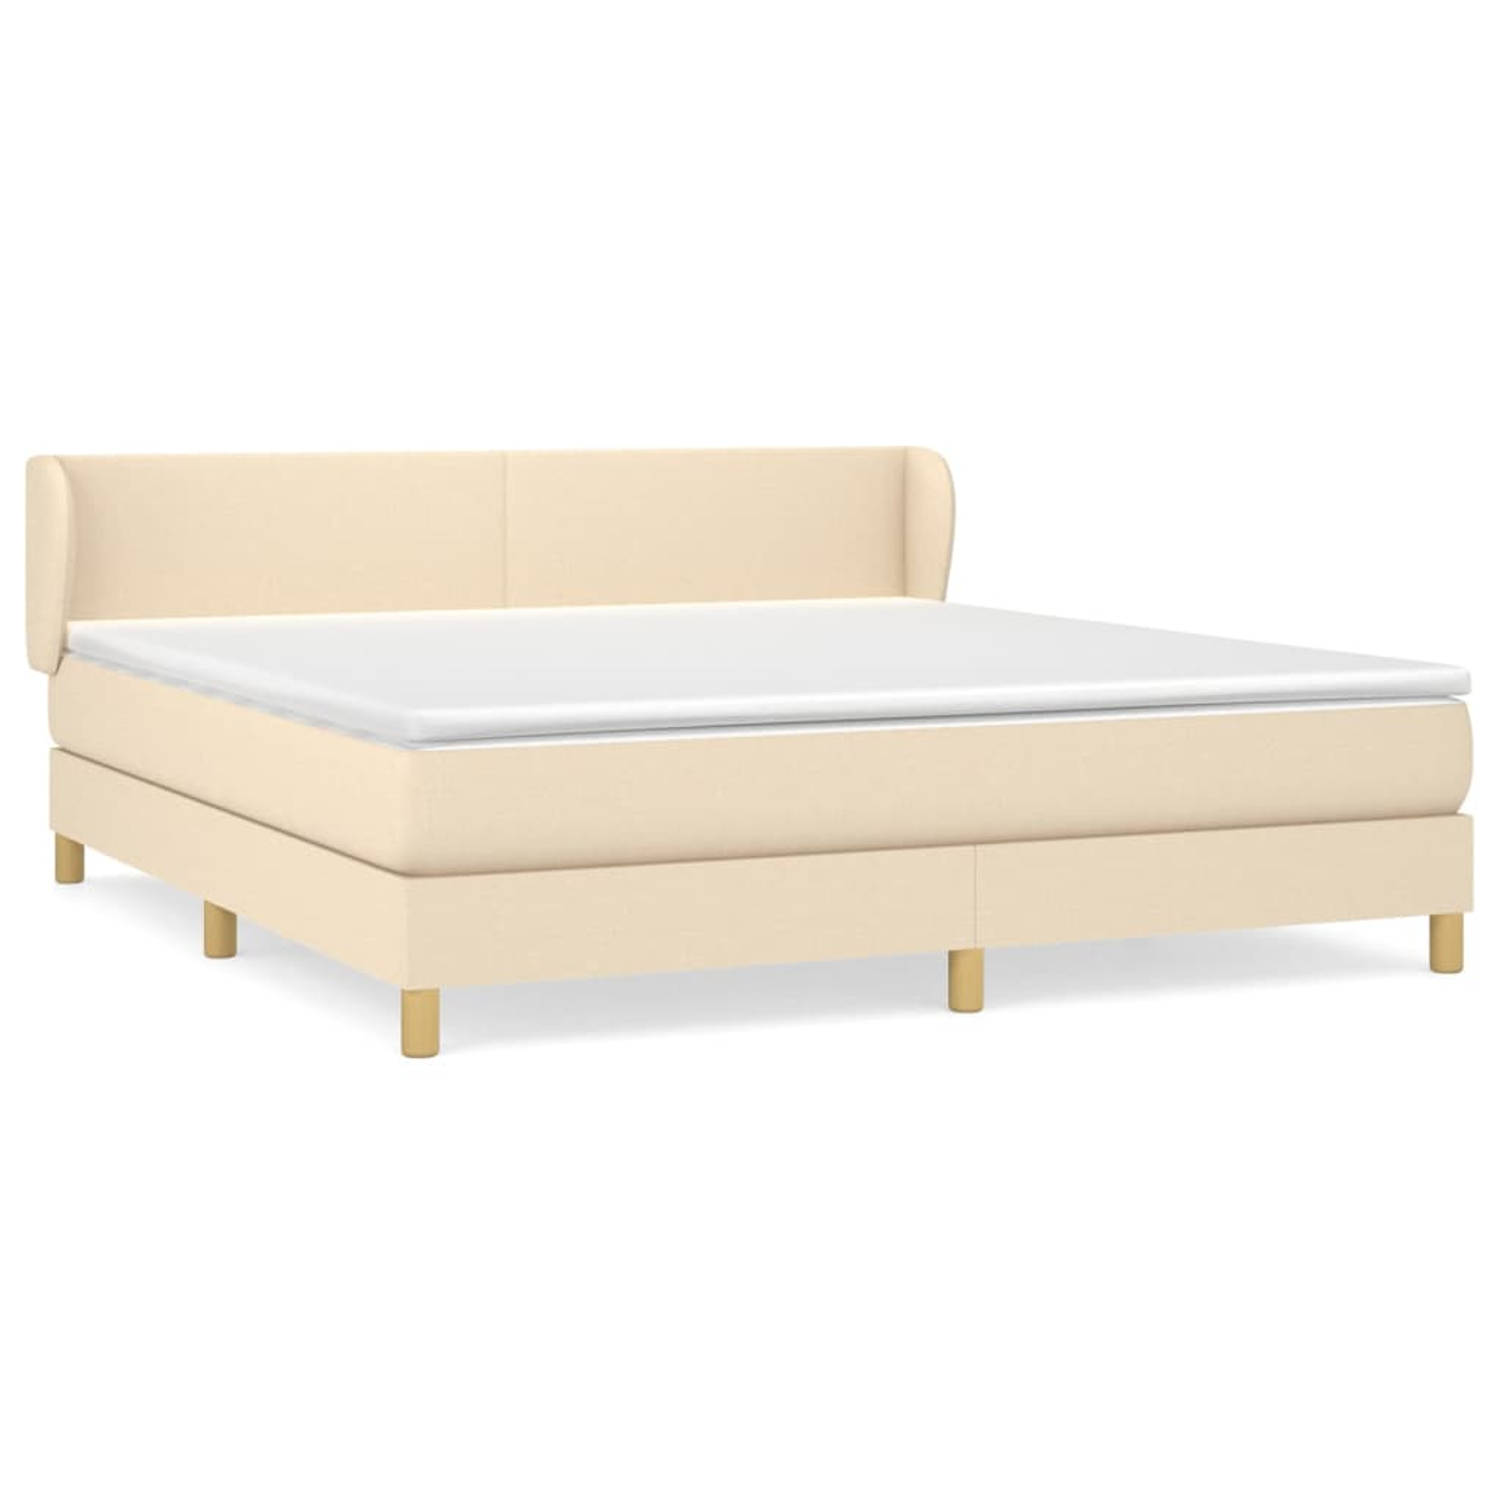 The Living Store Boxspringbed - - Bed - 203 x 183 x 78/88 cm - Crème - stof (100% polyester)